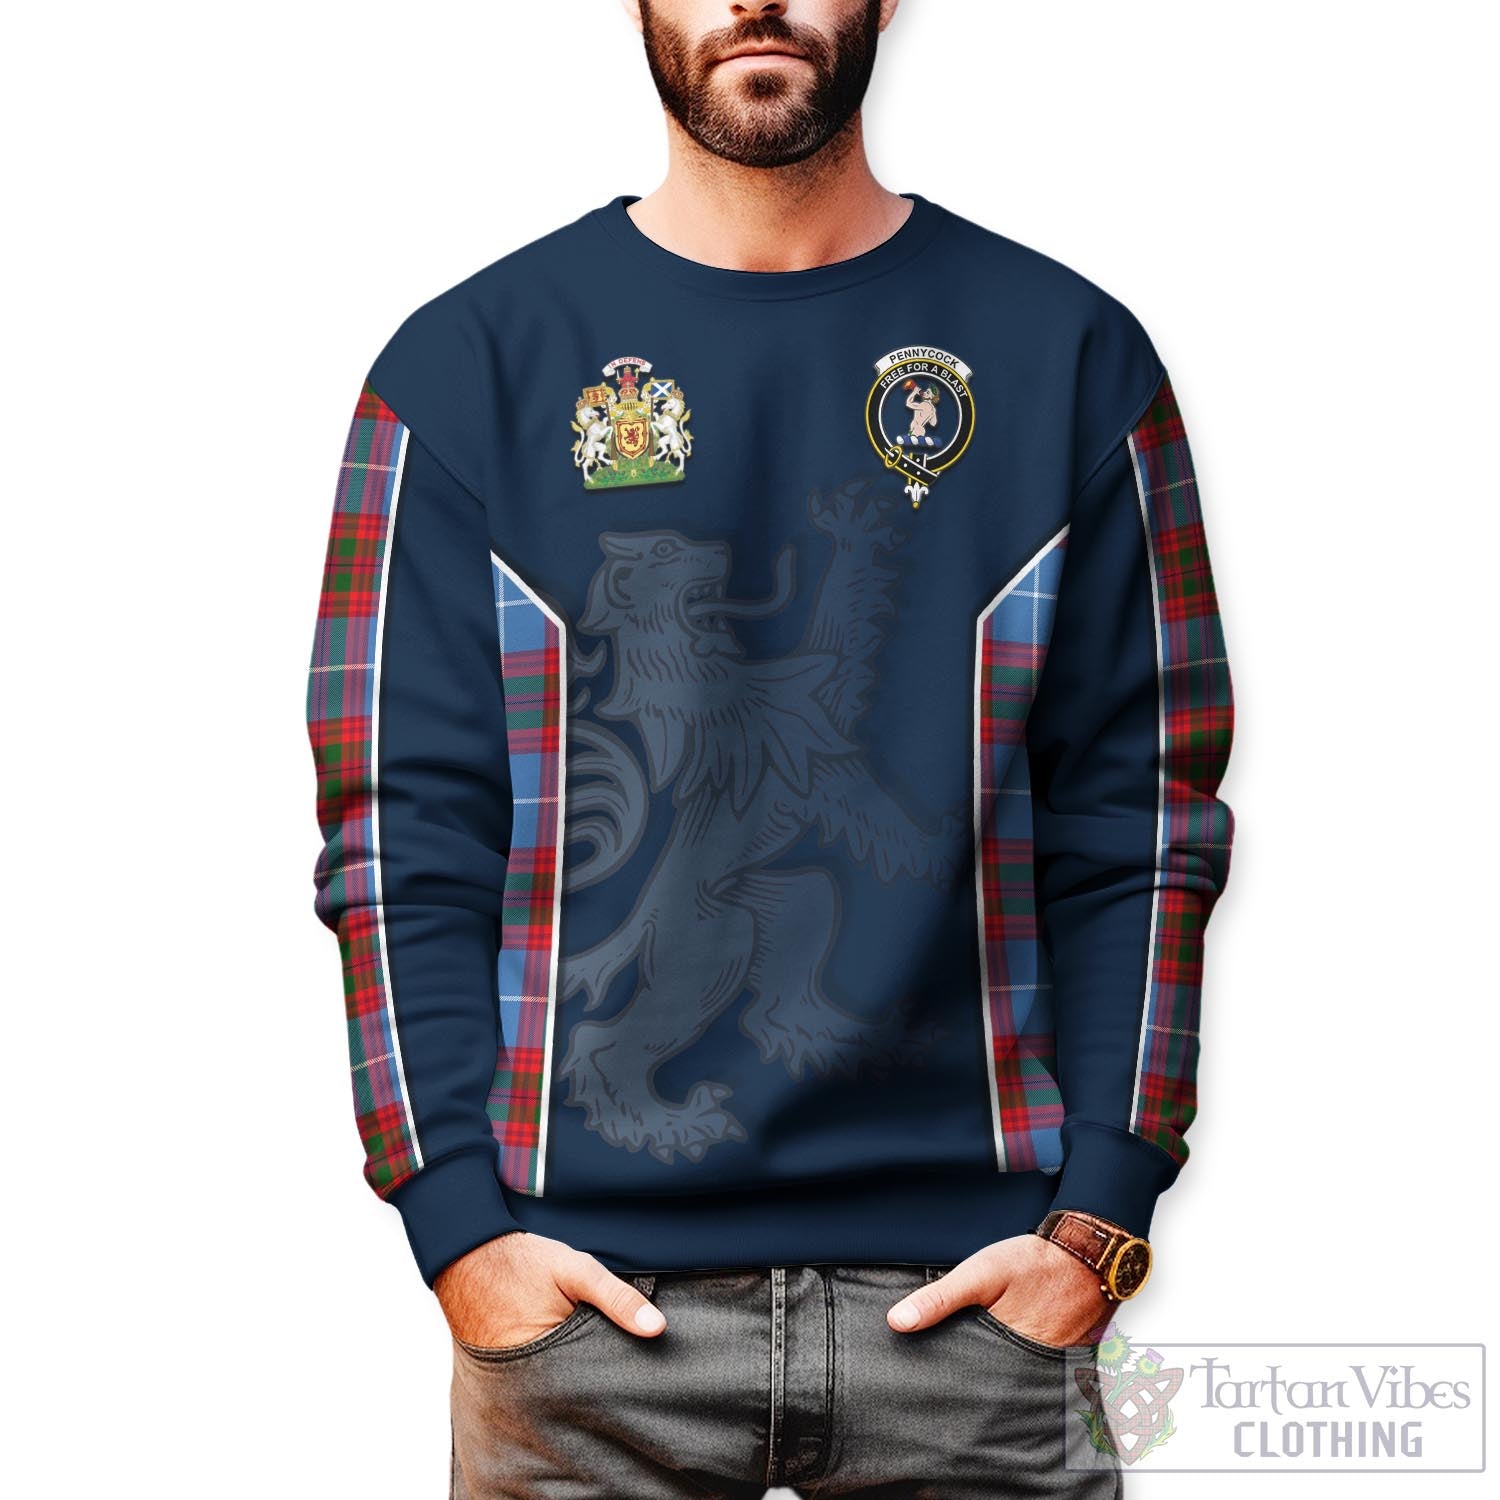 Tartan Vibes Clothing Pennycook Tartan Sweater with Family Crest and Lion Rampant Vibes Sport Style